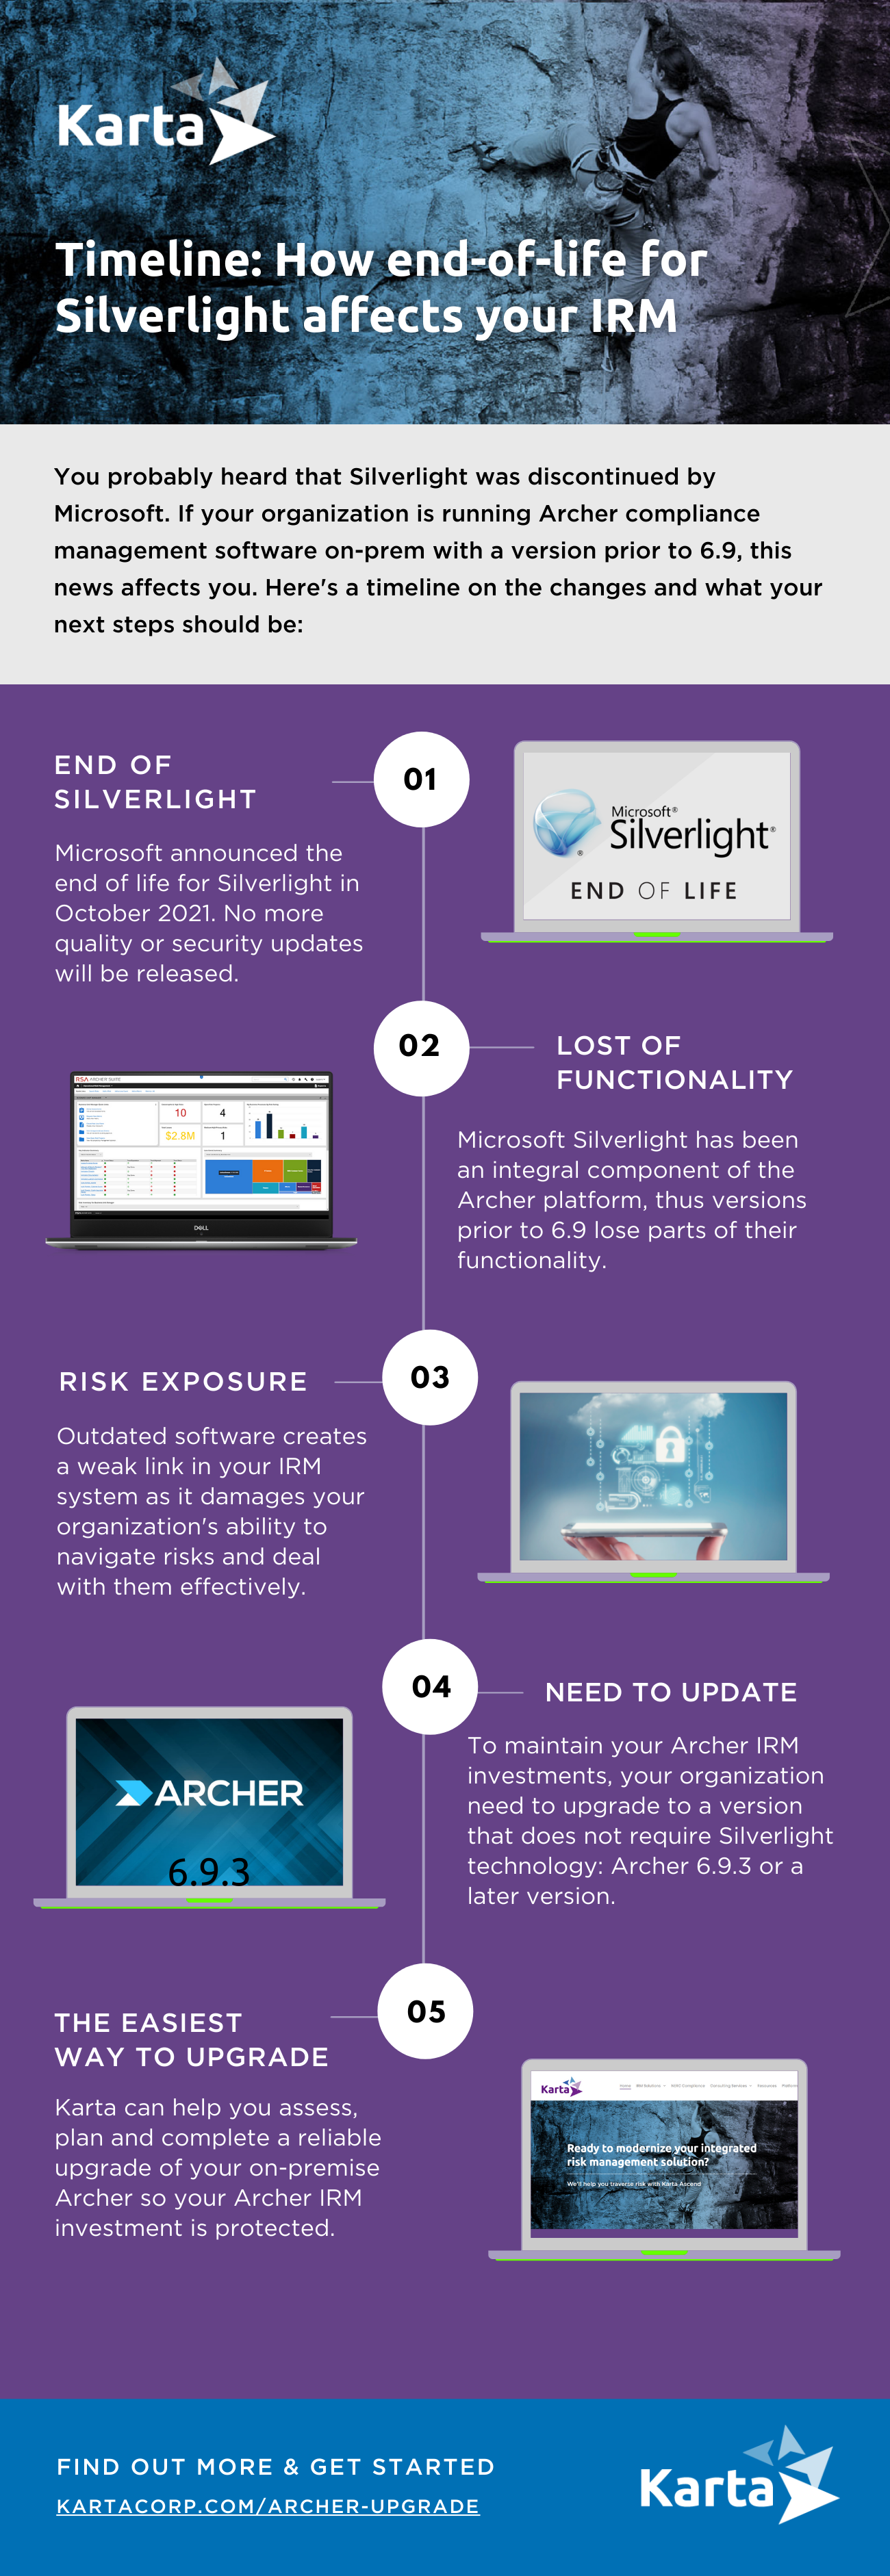 Timeline: How end-of-life for Silverlight affects your IRM